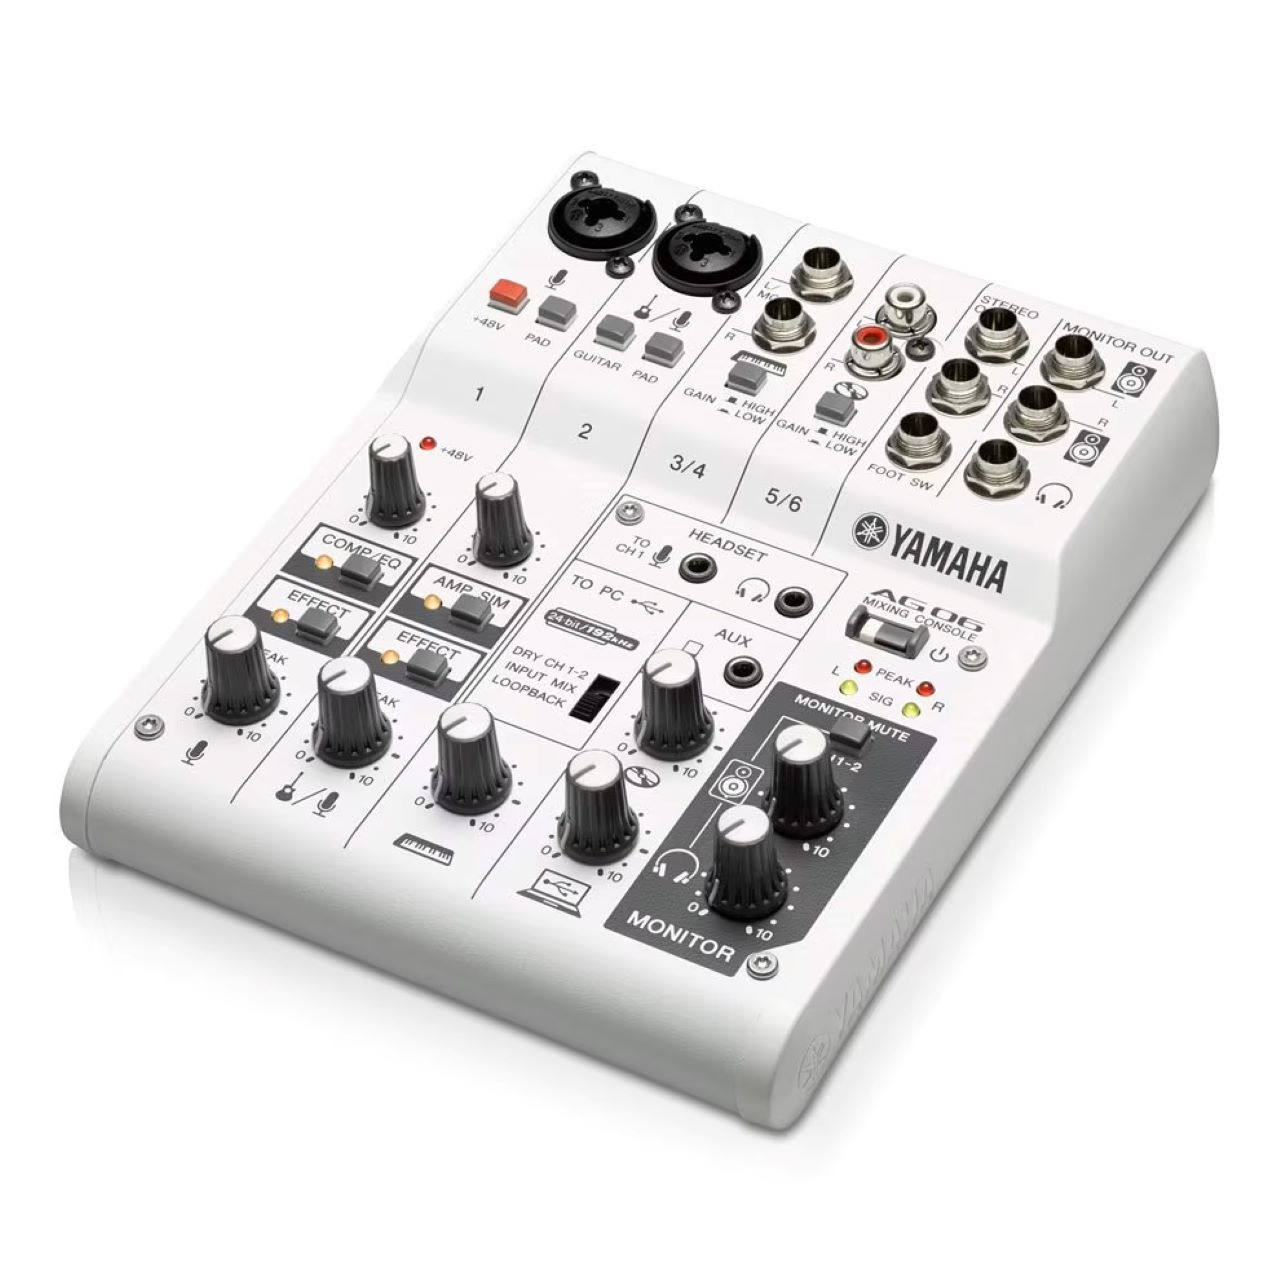 The Yamaha AG06 lands in our list of best multi USB microphone mixer in the market.